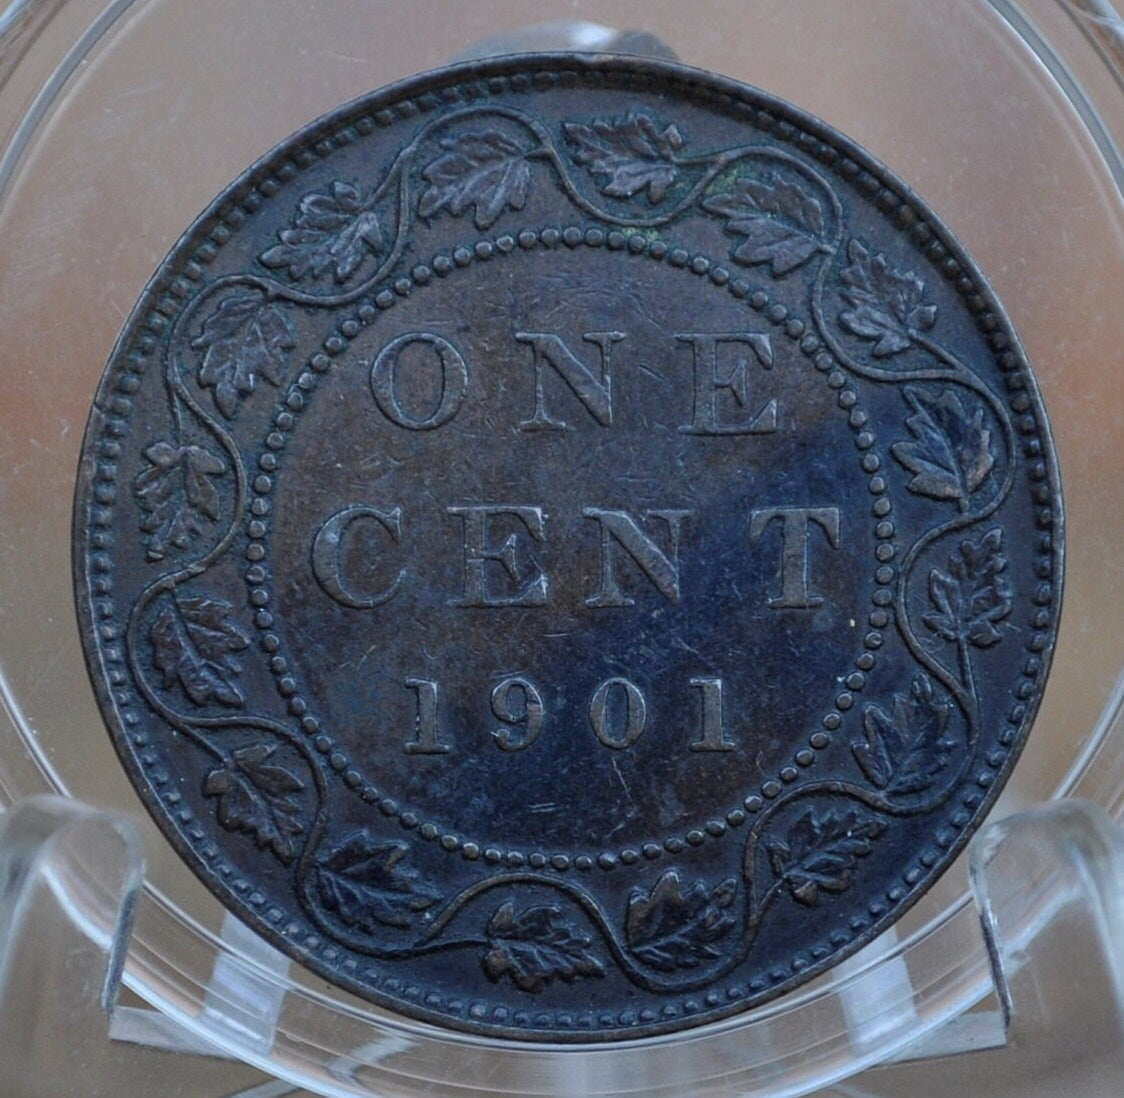 1901 Canadian Cent - VF-XF (Very to Extremely Fine) Condition - Queen Victoria - One Cent Canada 1901 Large Cent - 1901 One Cent